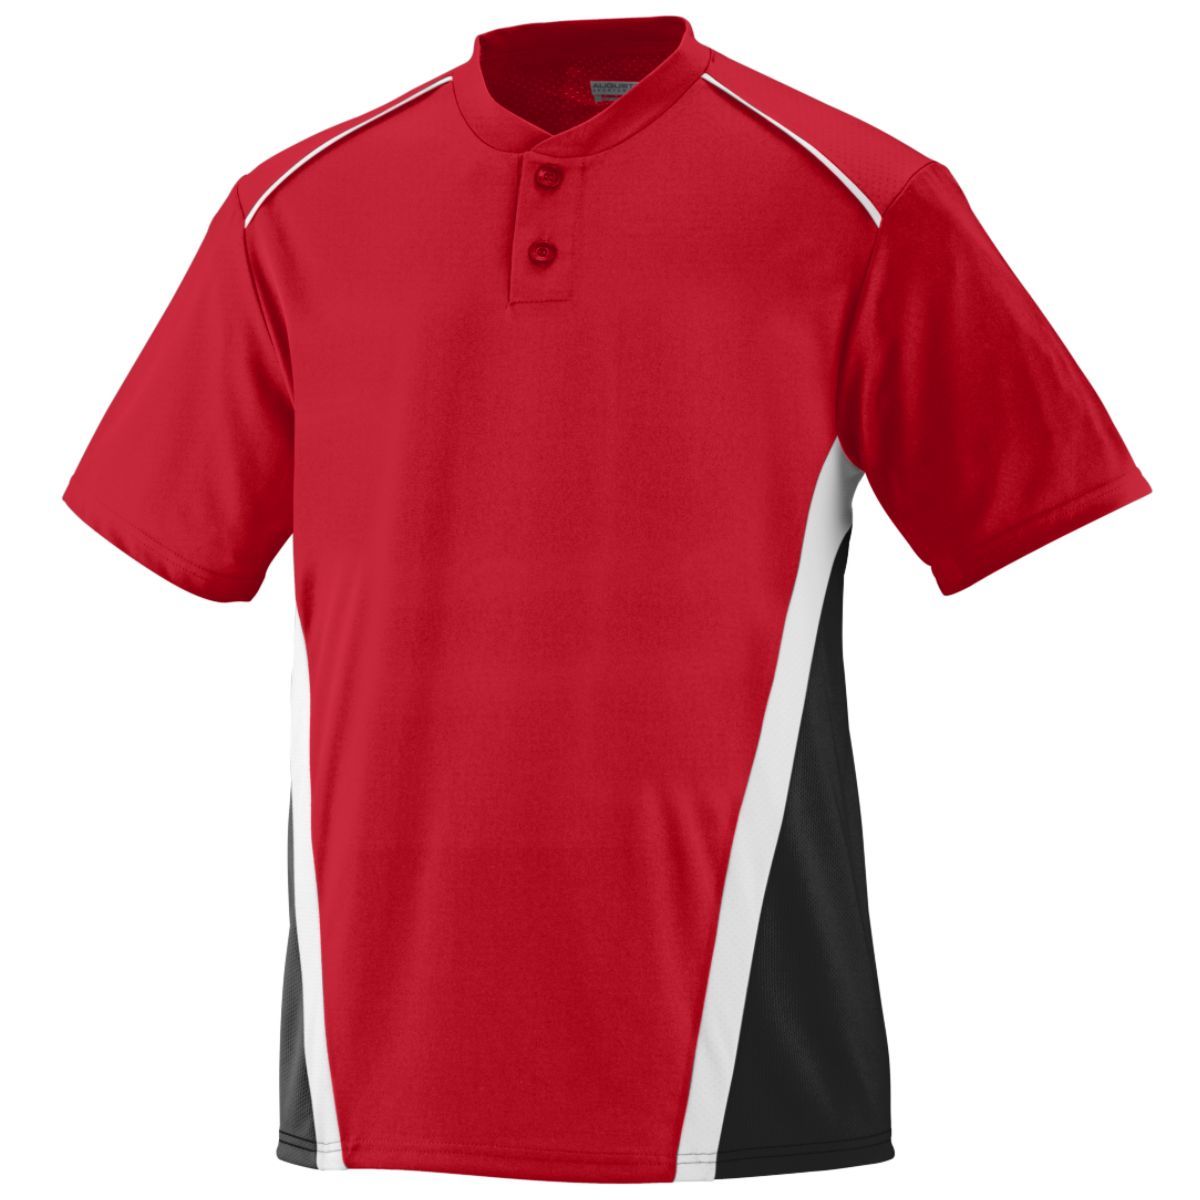 Augusta Sportswear Rbi Jersey in Red/Black/White  -Part of the Adult, Adult-Jersey, Augusta-Products, Softball, Shirts product lines at KanaleyCreations.com